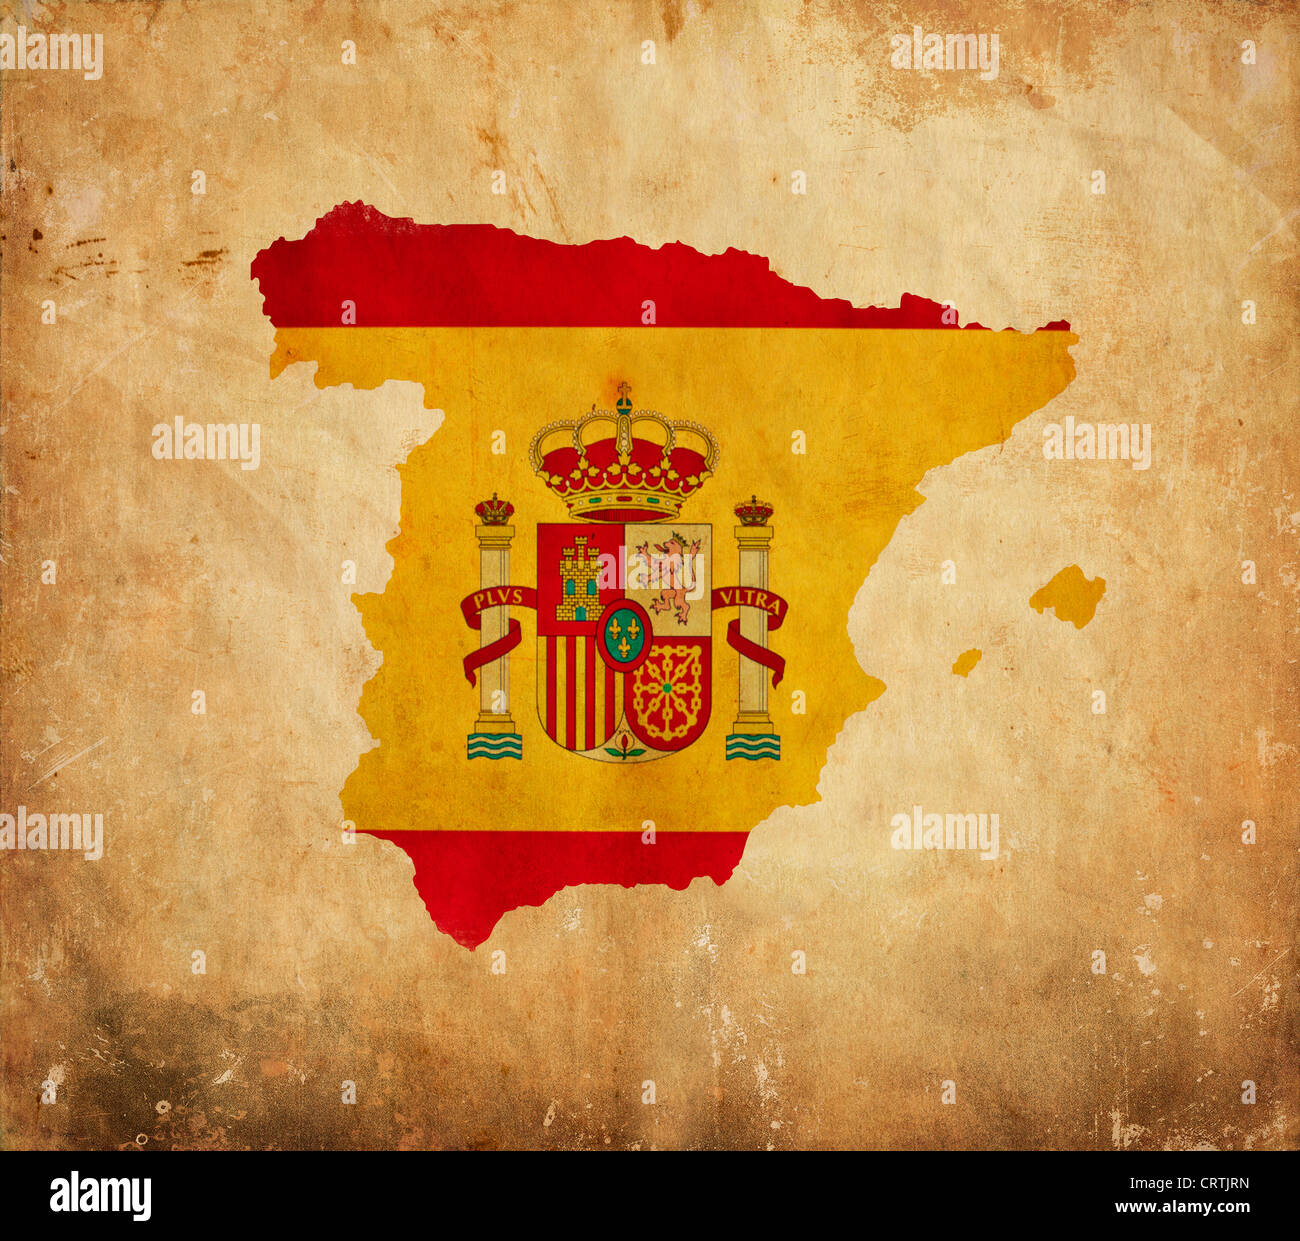 Vintage map of Spain on grunge paper Stock Photo